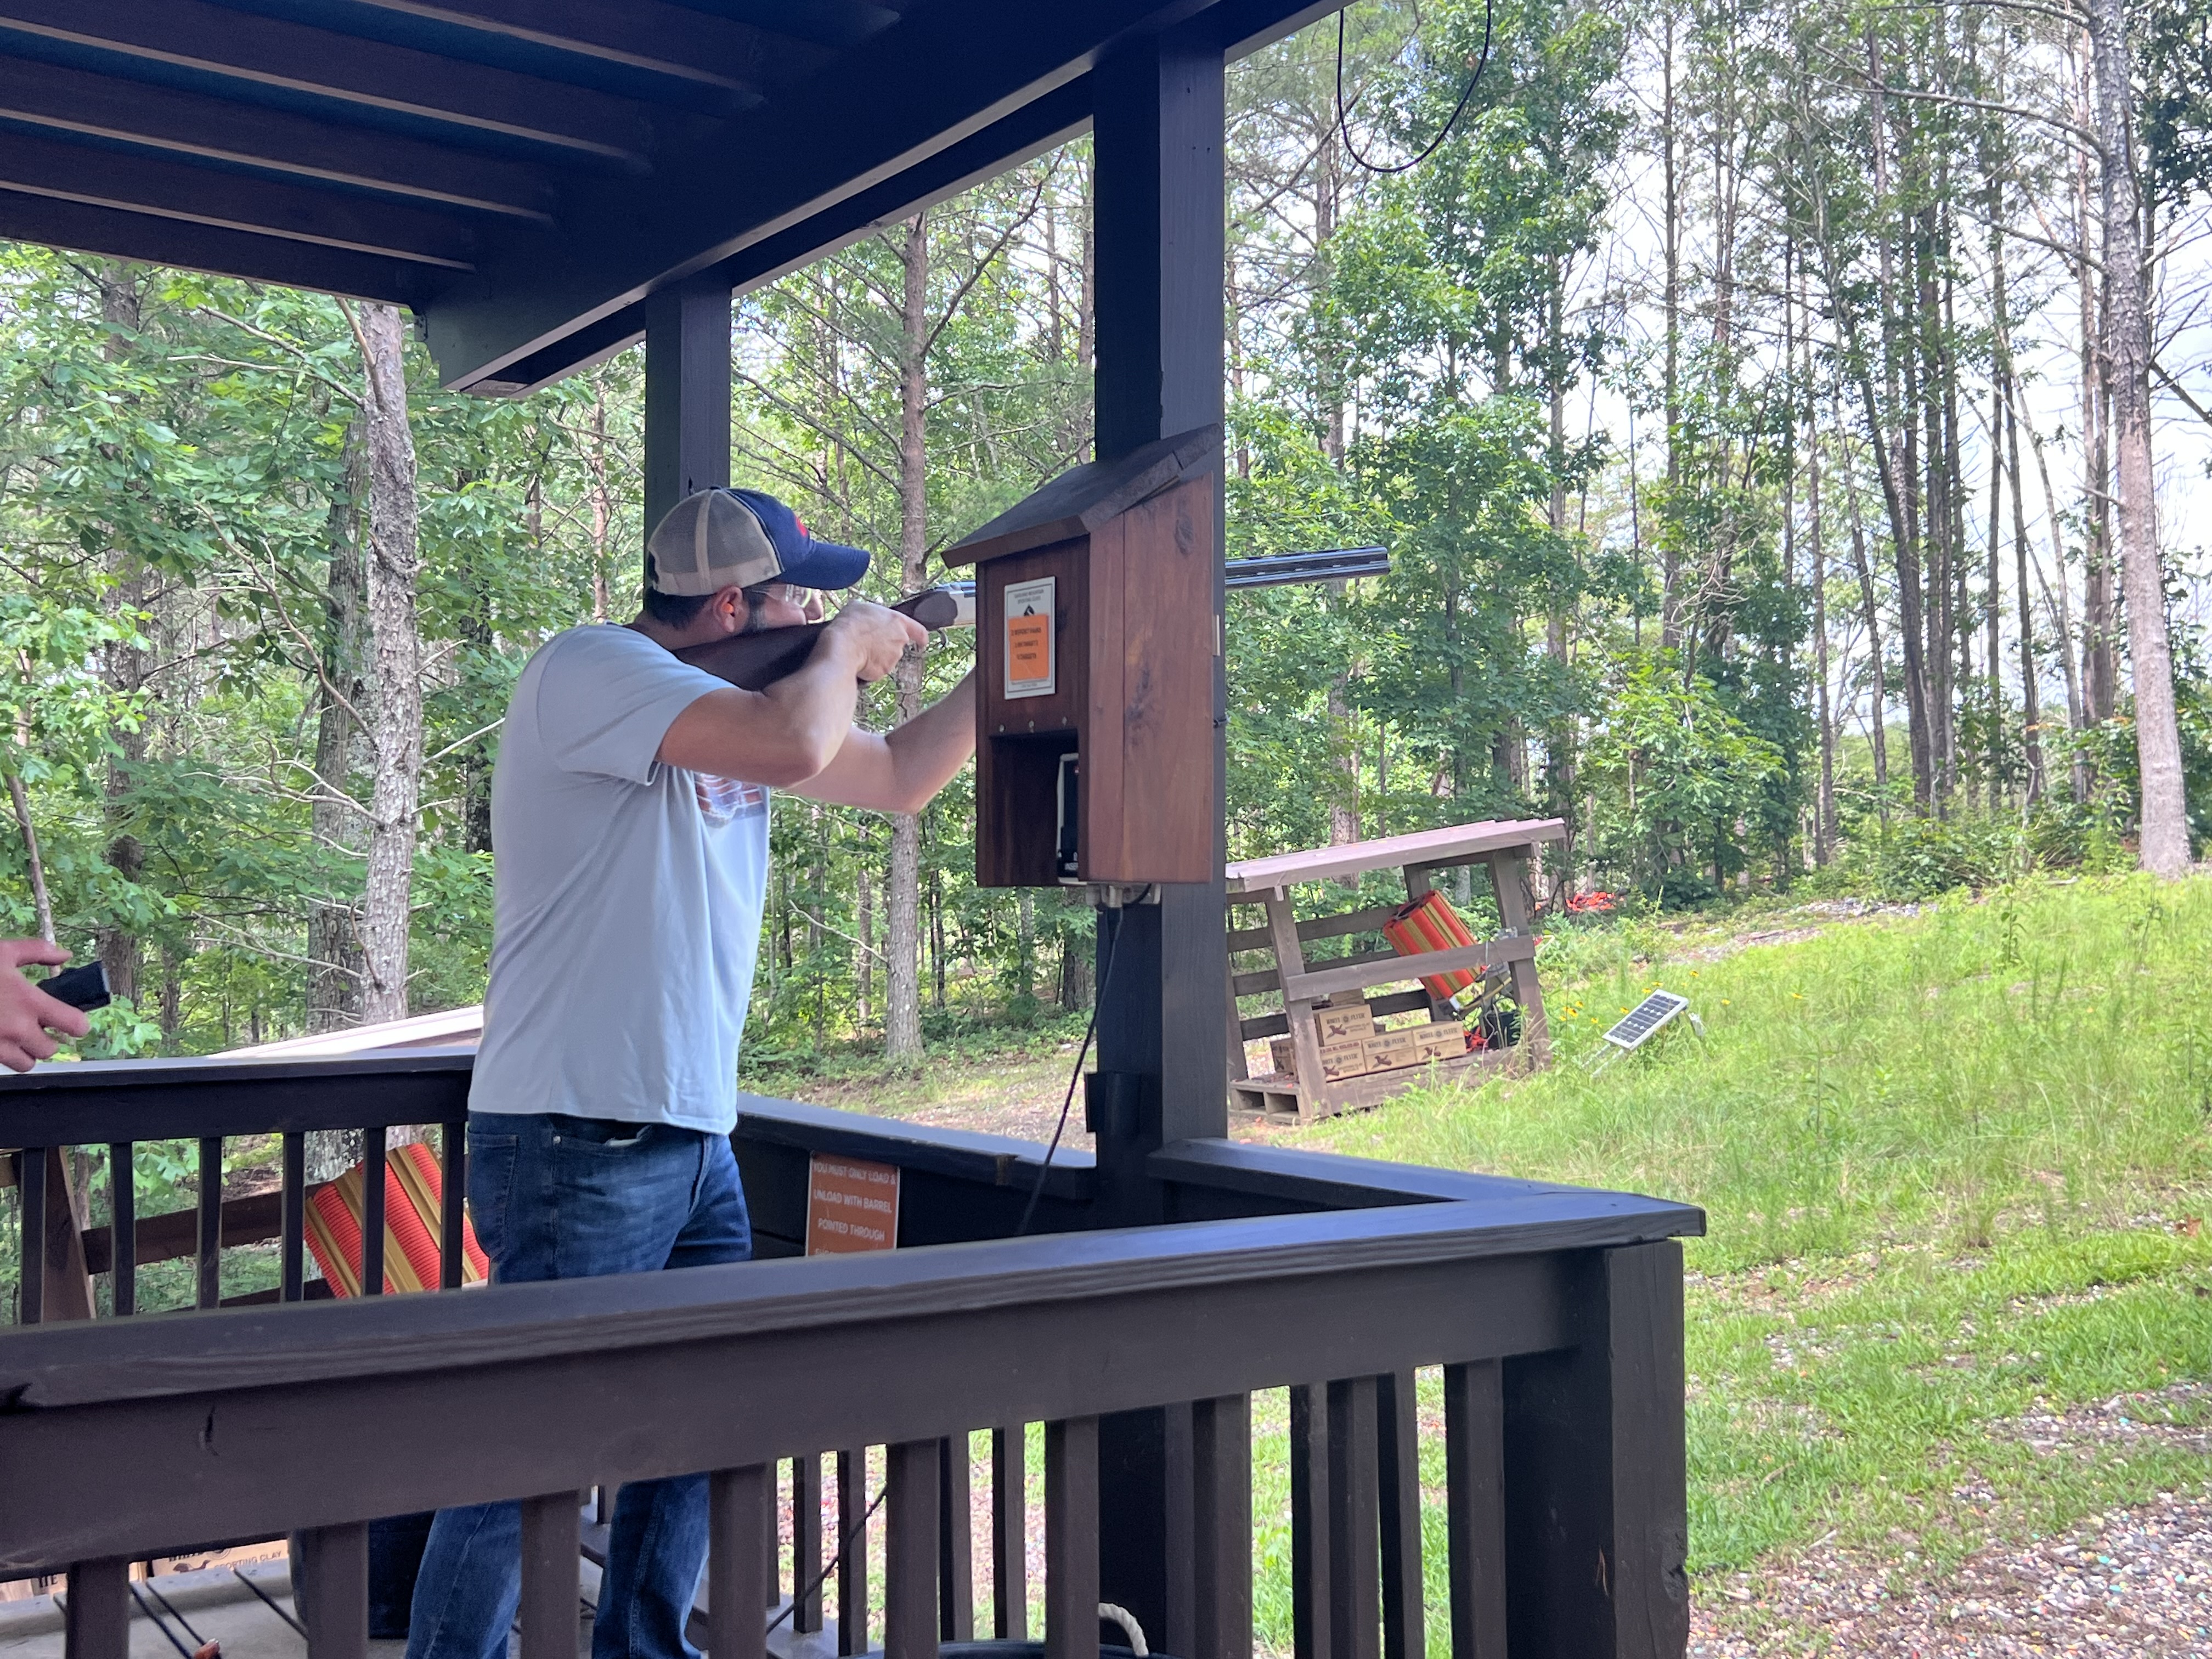 Scenes from the 2023 CCEF Sporting Clays Classic, taking place on June 23rd, 2023.